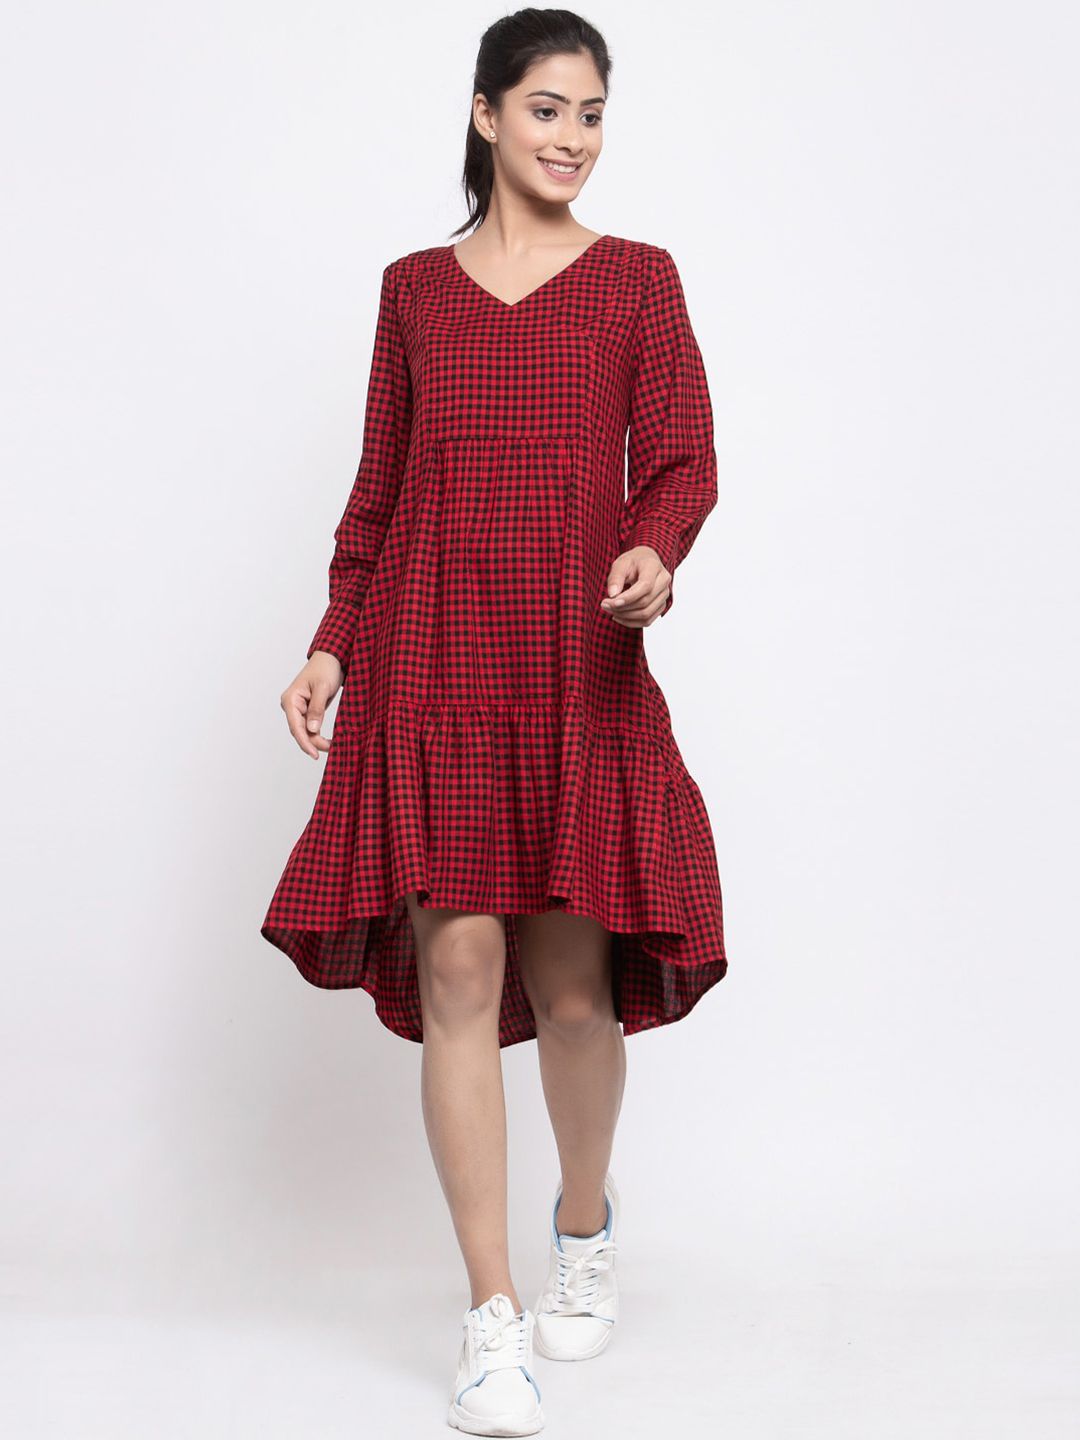 TERQUOIS Women Red Printed Oversized Drop-Waist Dress Price in India